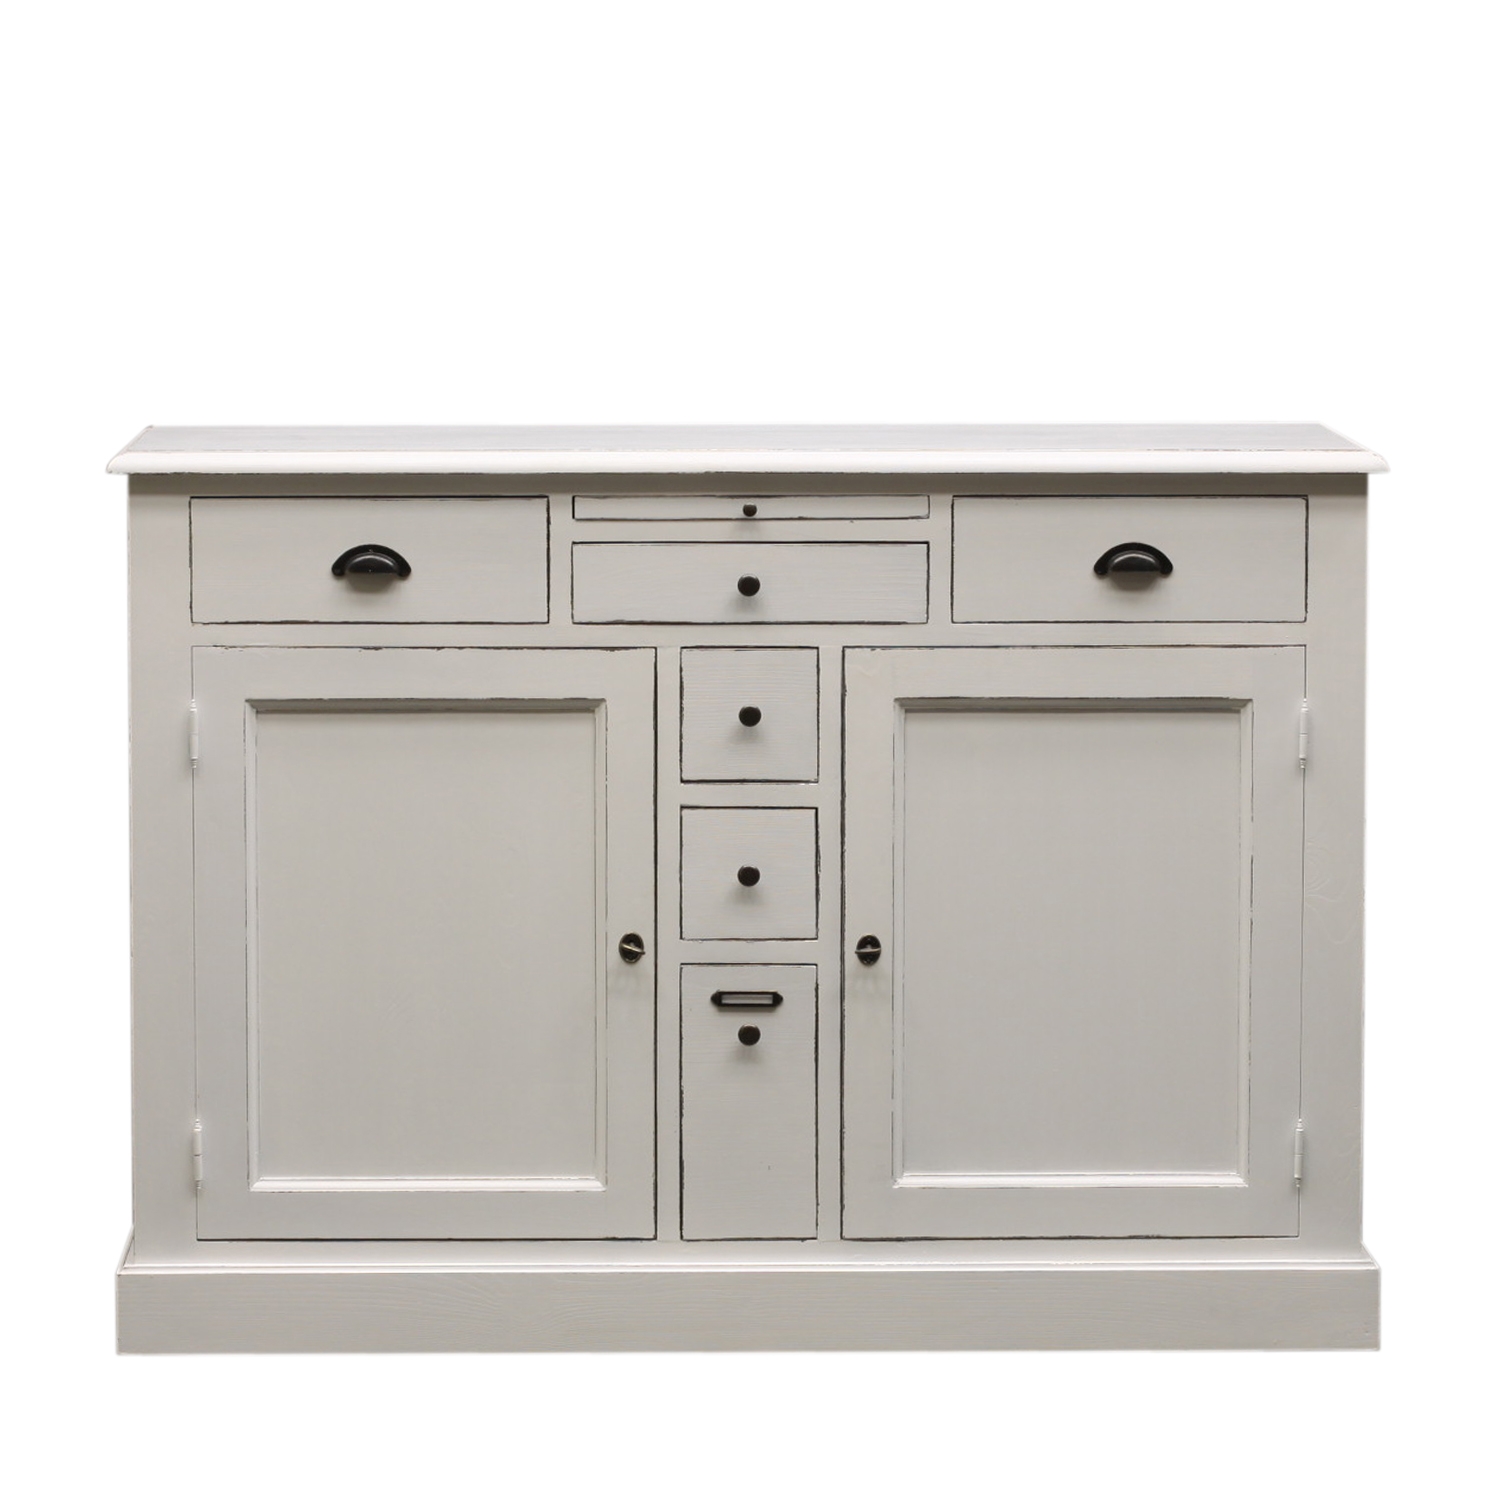 Sideboard Clement 45D536